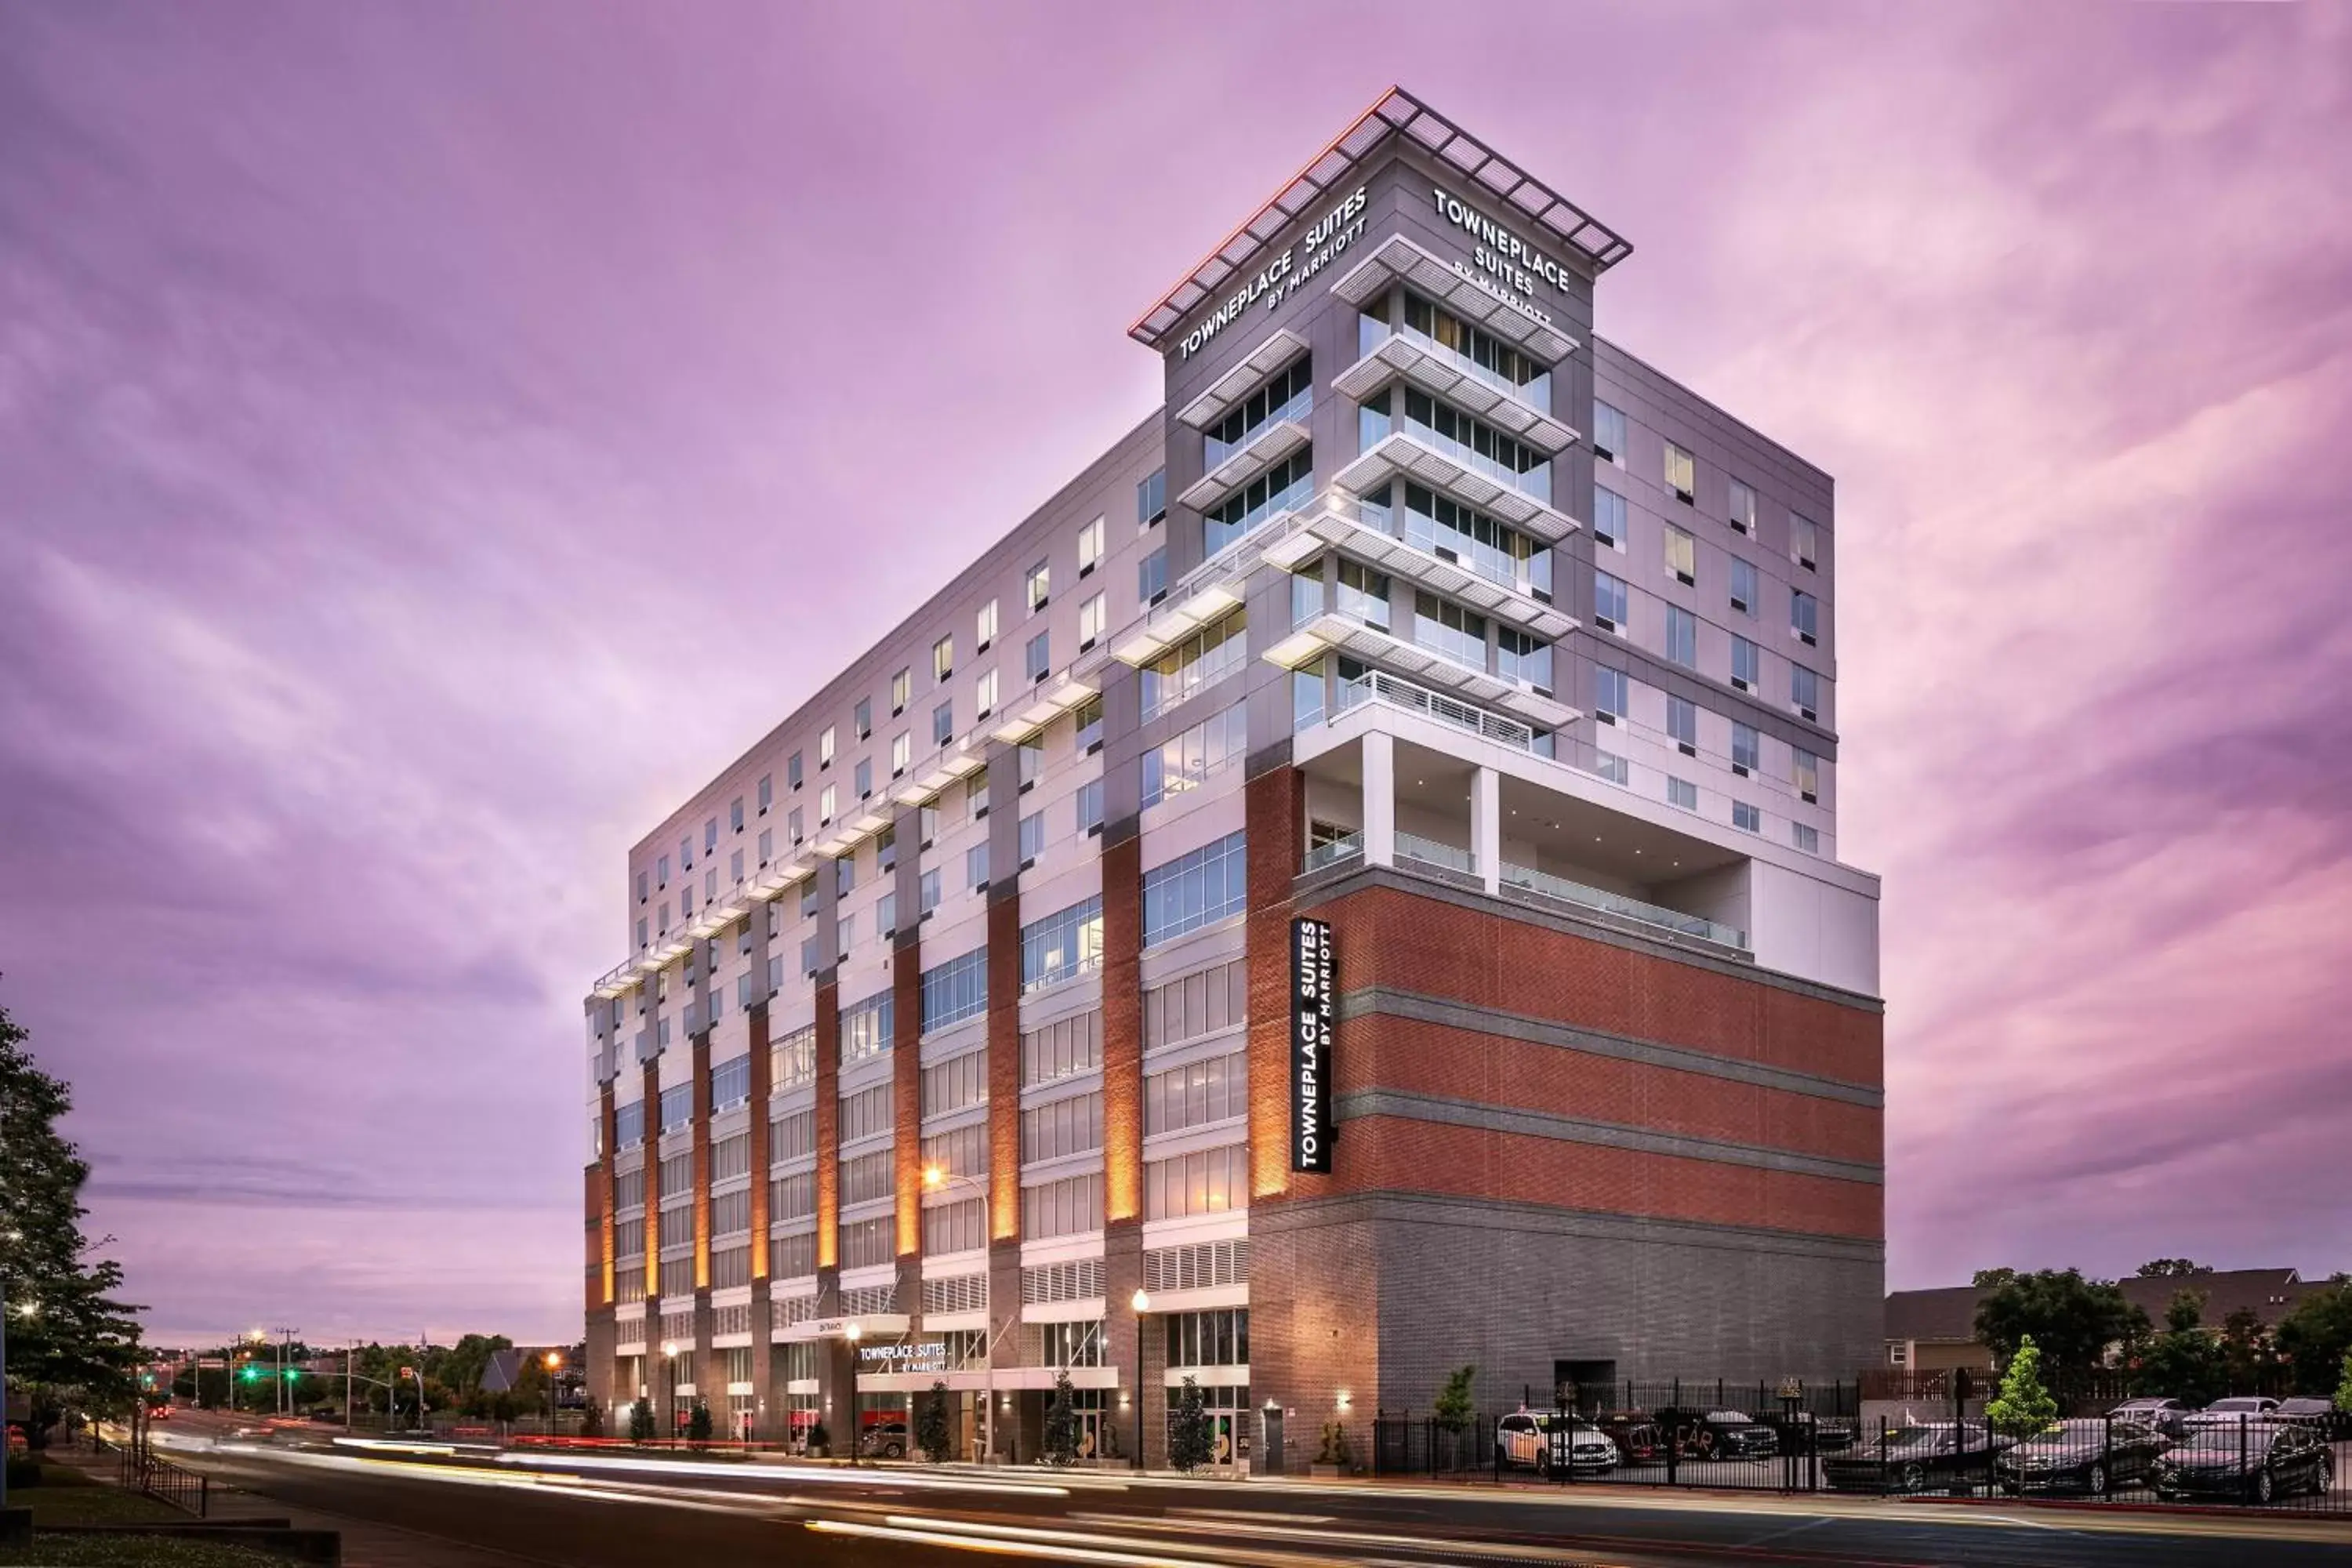 Property Building in TownePlace Suites by Marriott Nashville Midtown